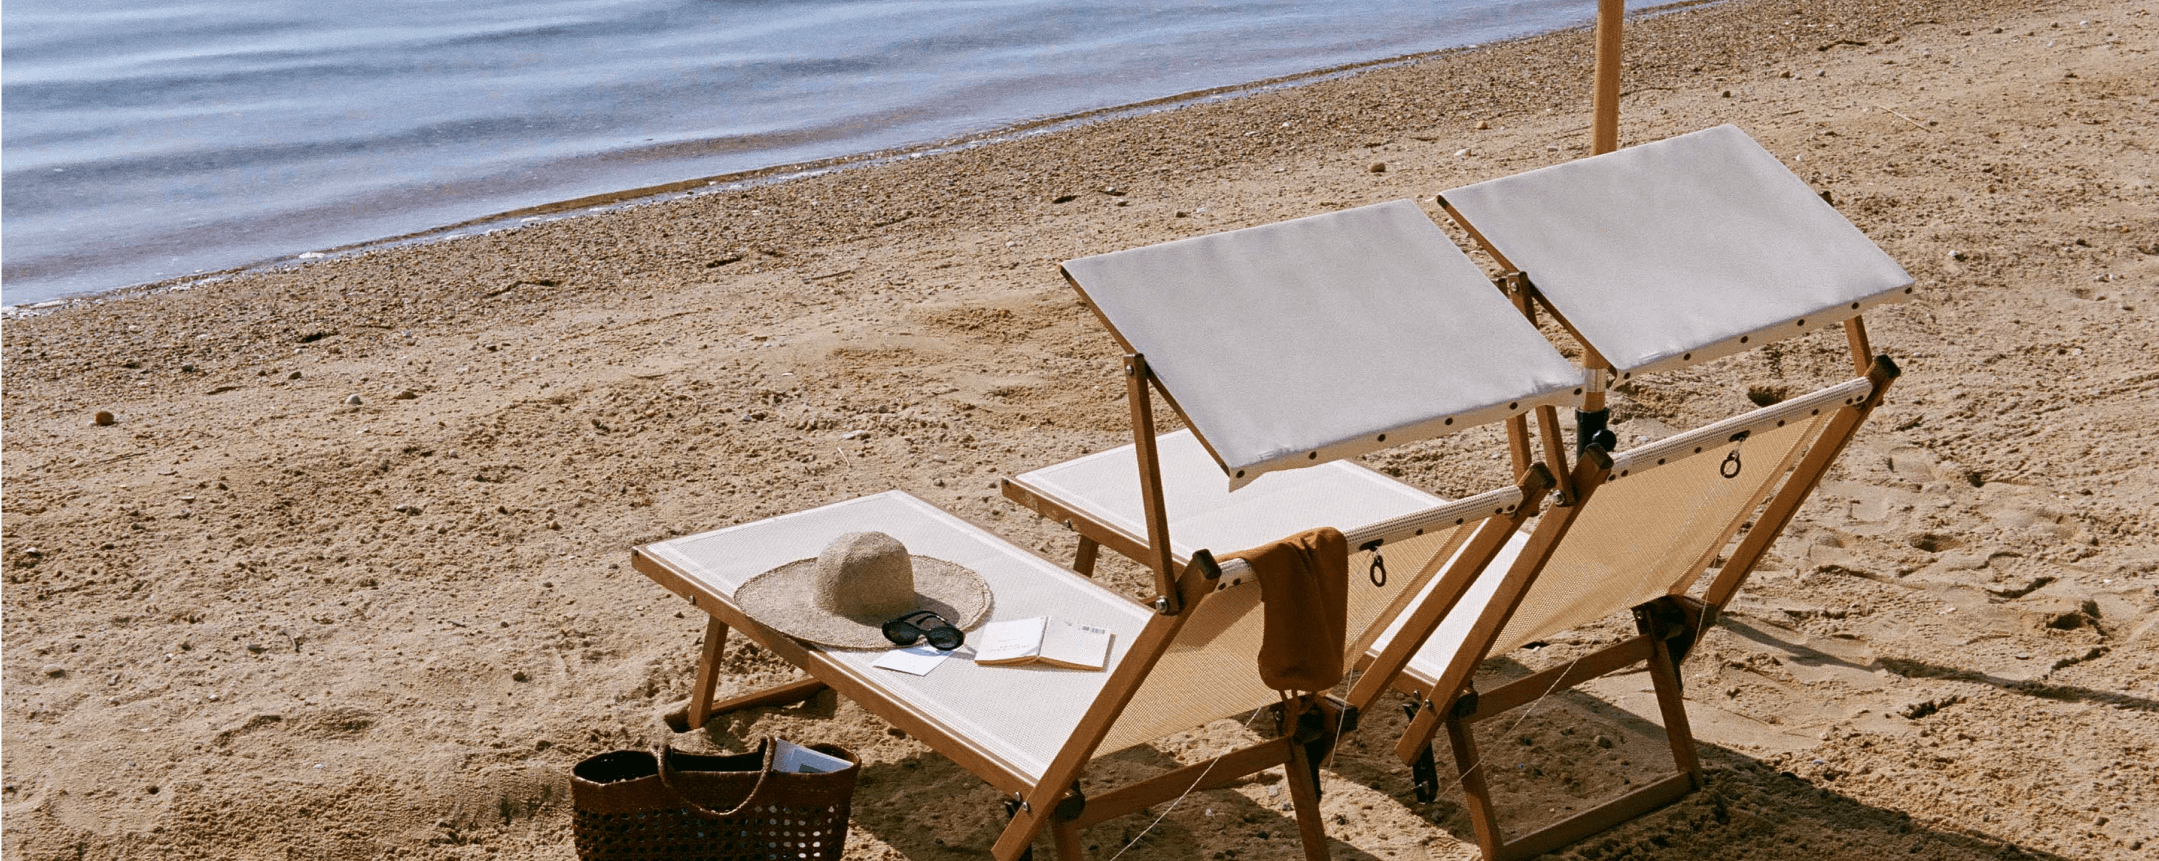 Two lounge chairs positioned by the seashore provide a splendid view of the sea.